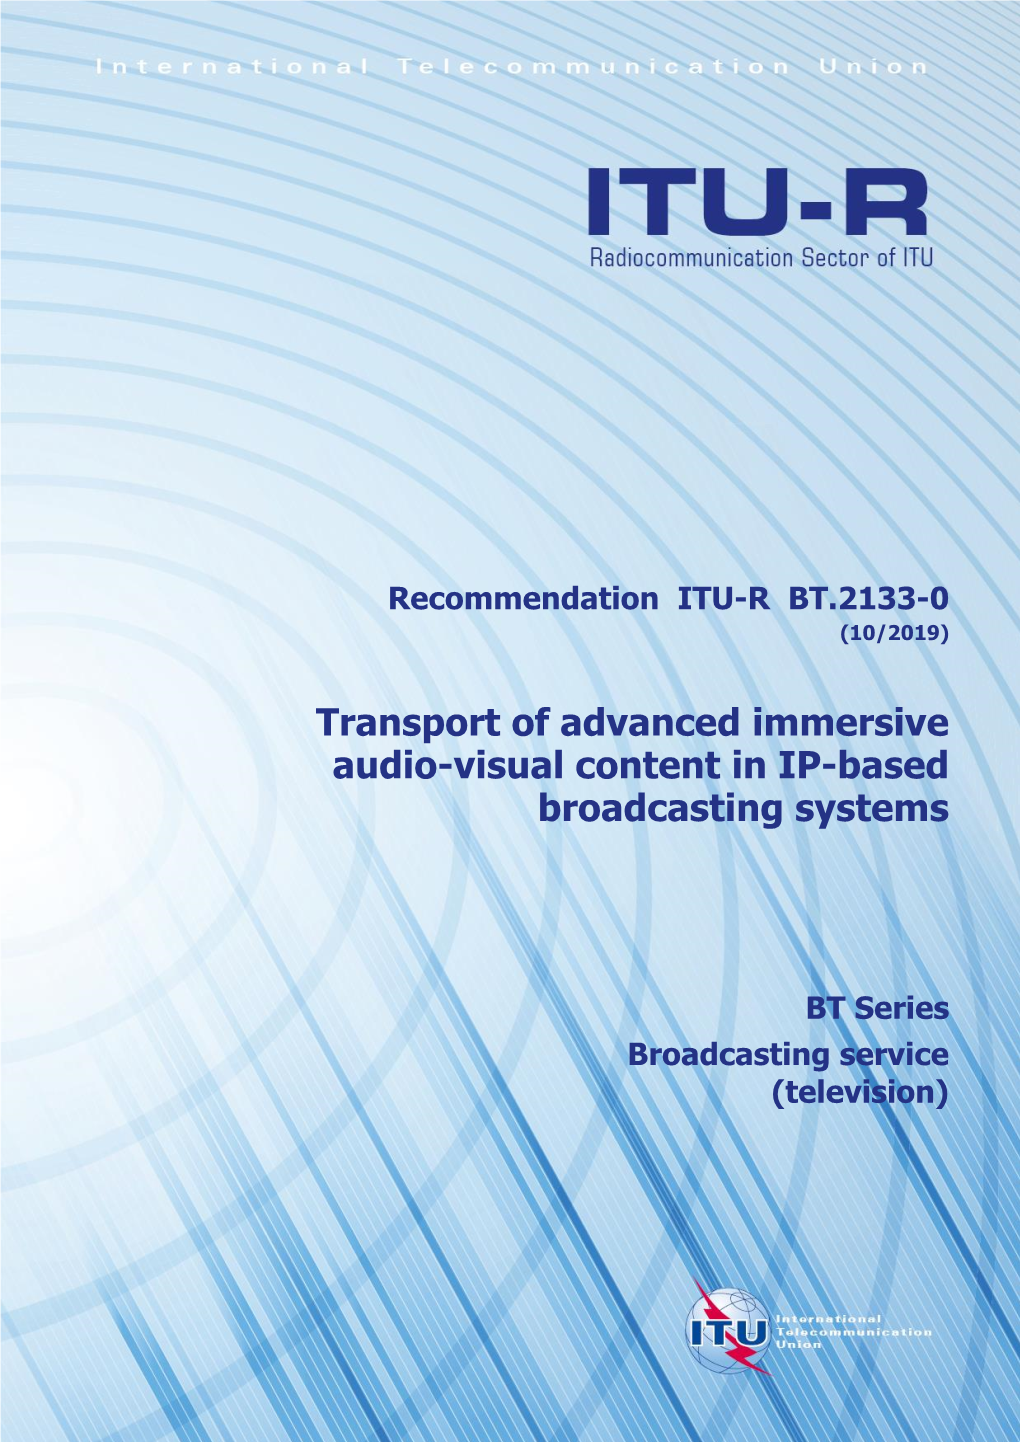 Transport of Advanced Immersive Audio-Visual Content in IP-Based Broadcasting Systems